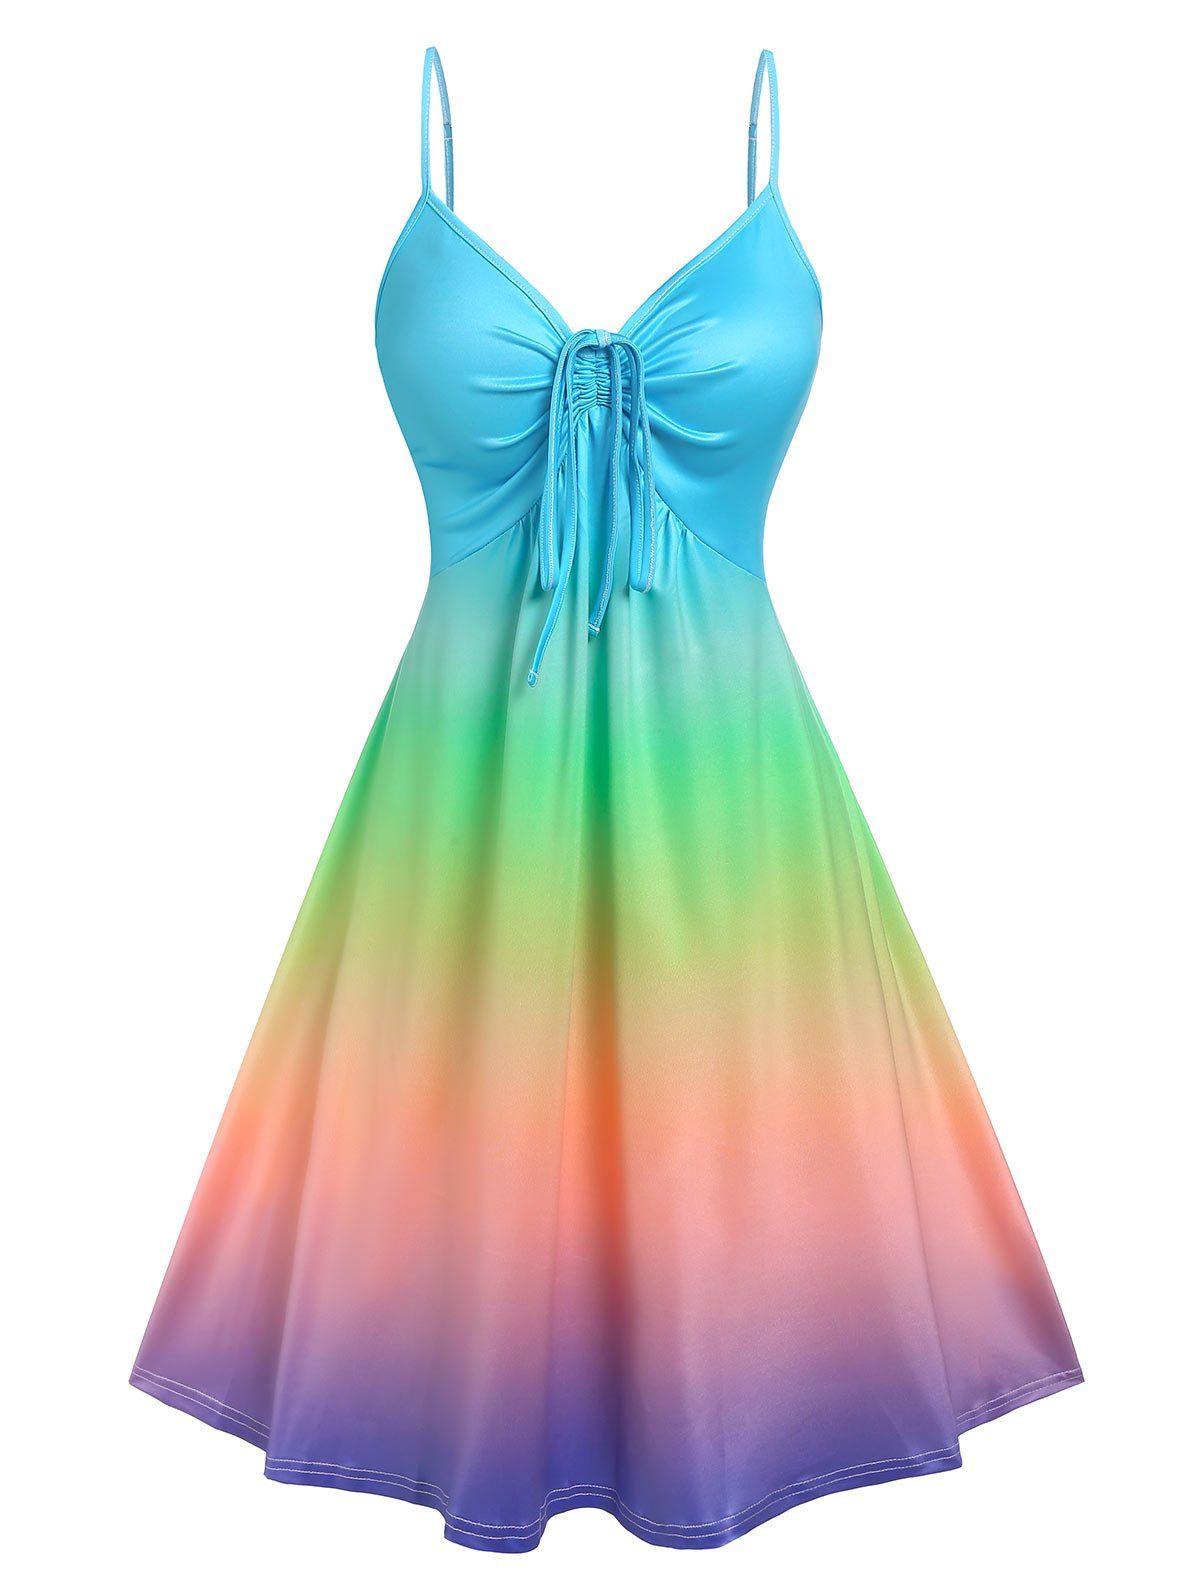 Ombre Rainbow Color A Line Sundress Cinched Tie Ruched Bust Slip Dress - LIGHT BLUE XL